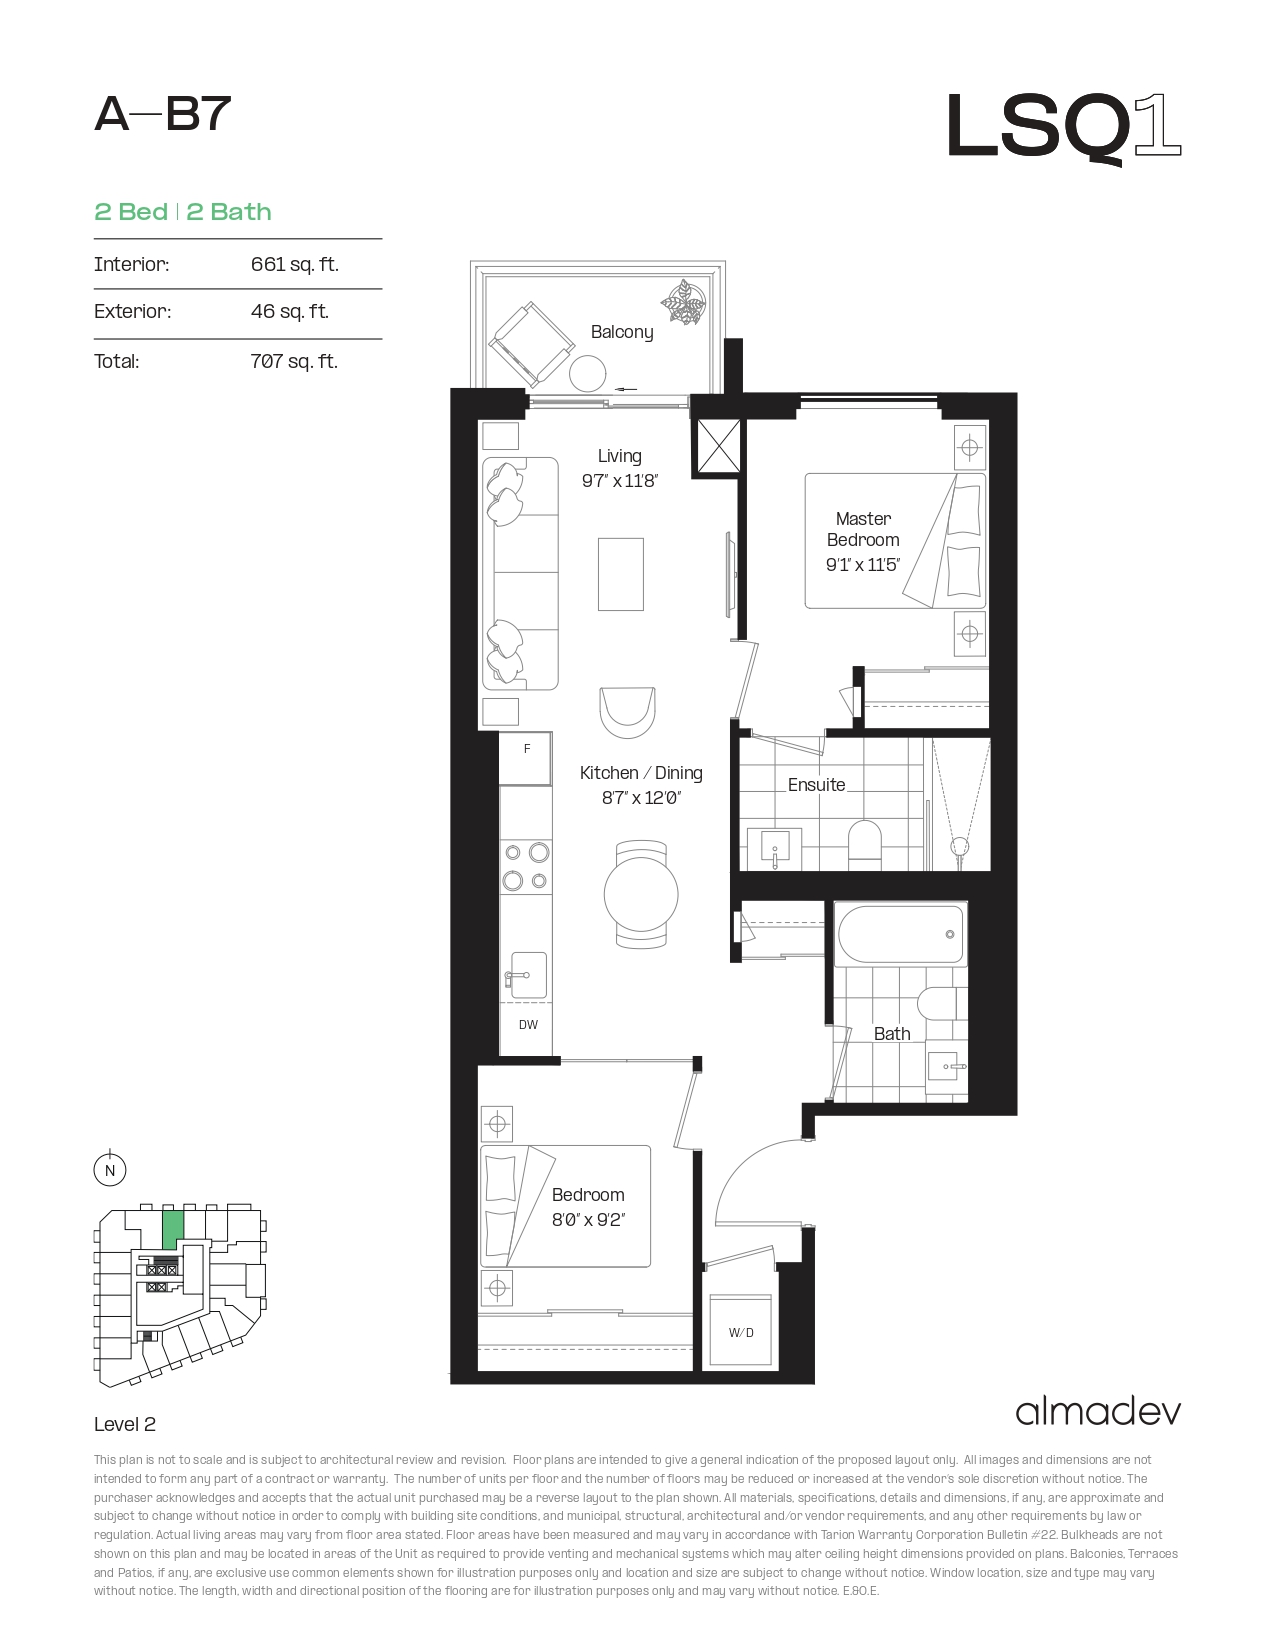 A-B7 Floor Plan of LSQ Condos with undefined beds